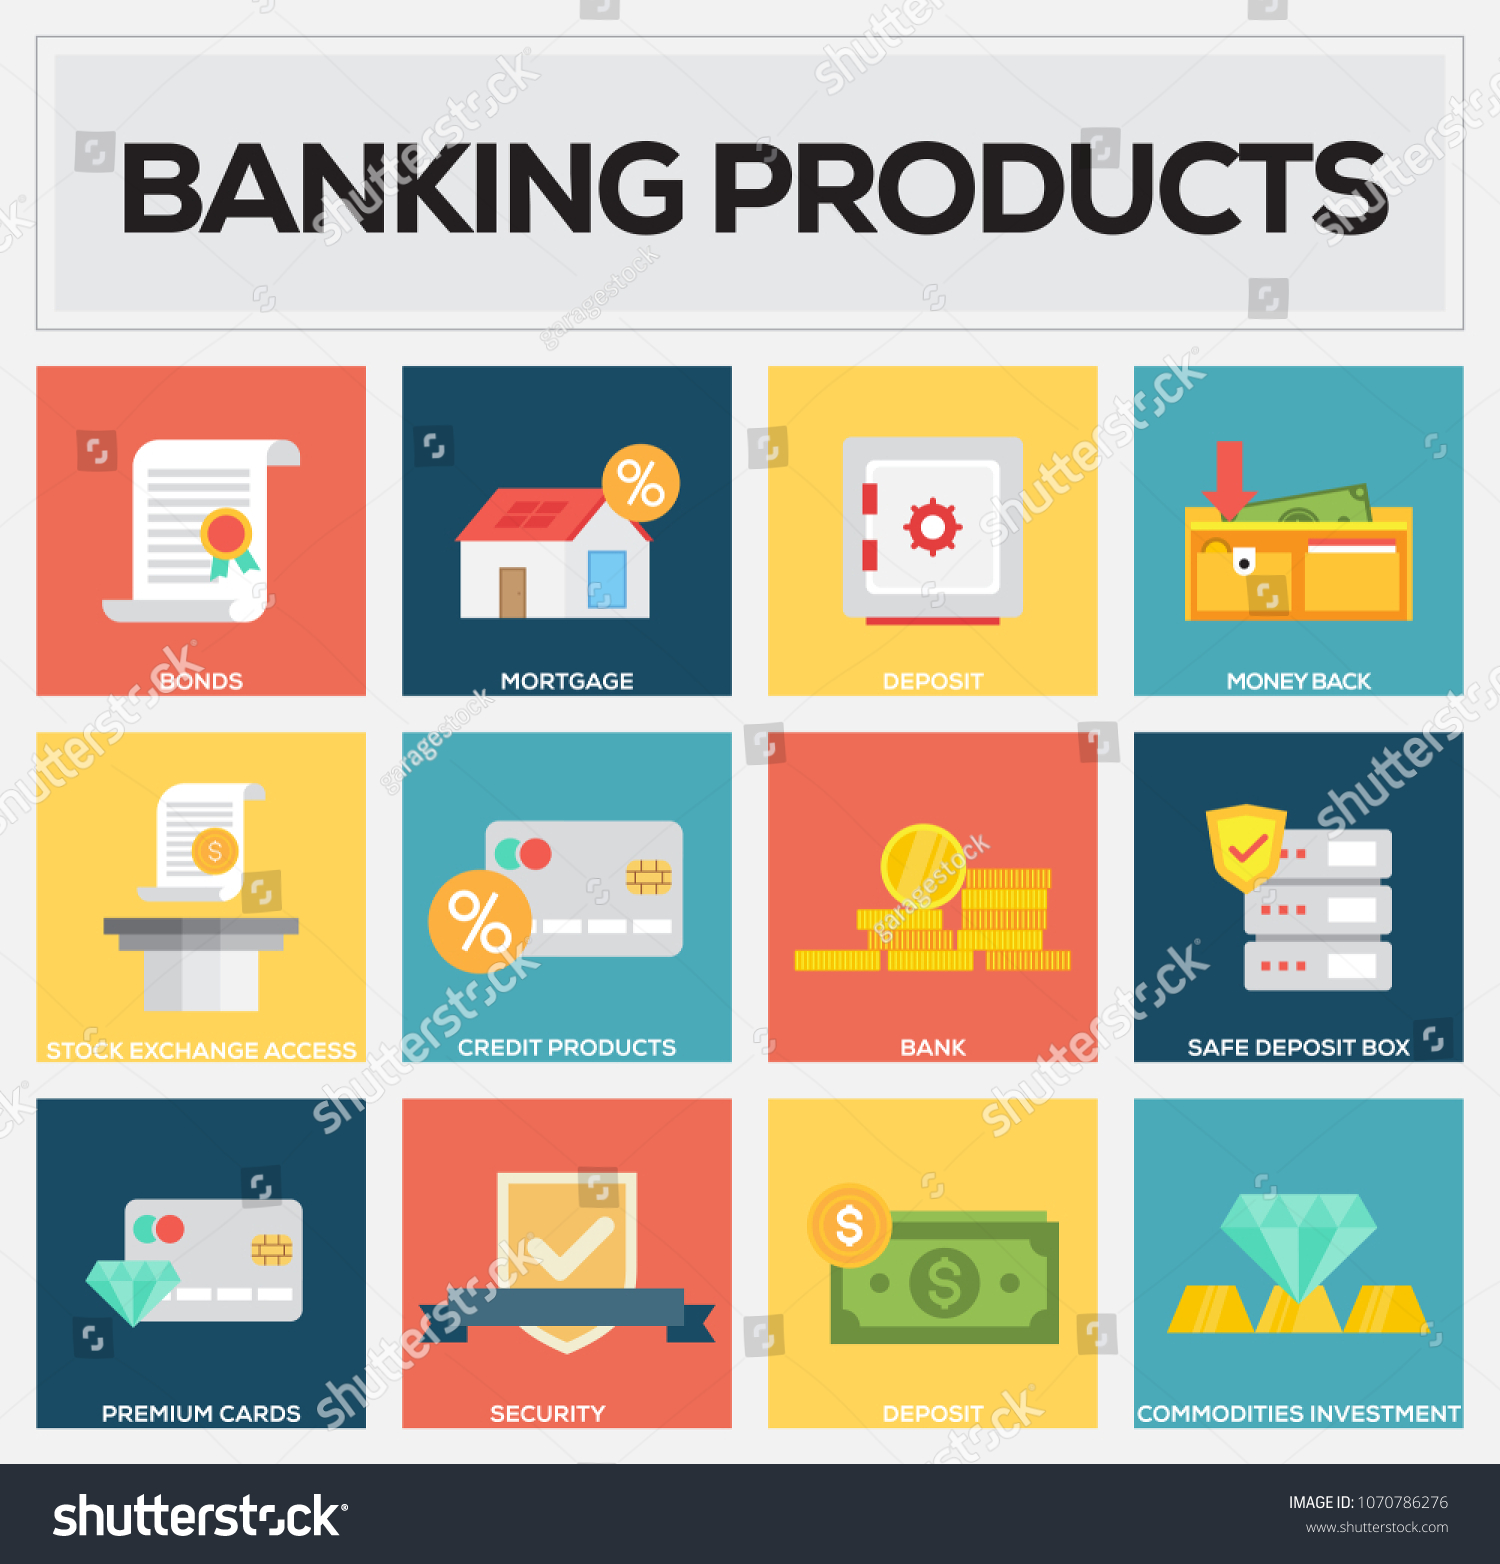 Banking Products Flat Icon Set Stock Vector (Royalty Free) 1070786276 |  Shutterstock